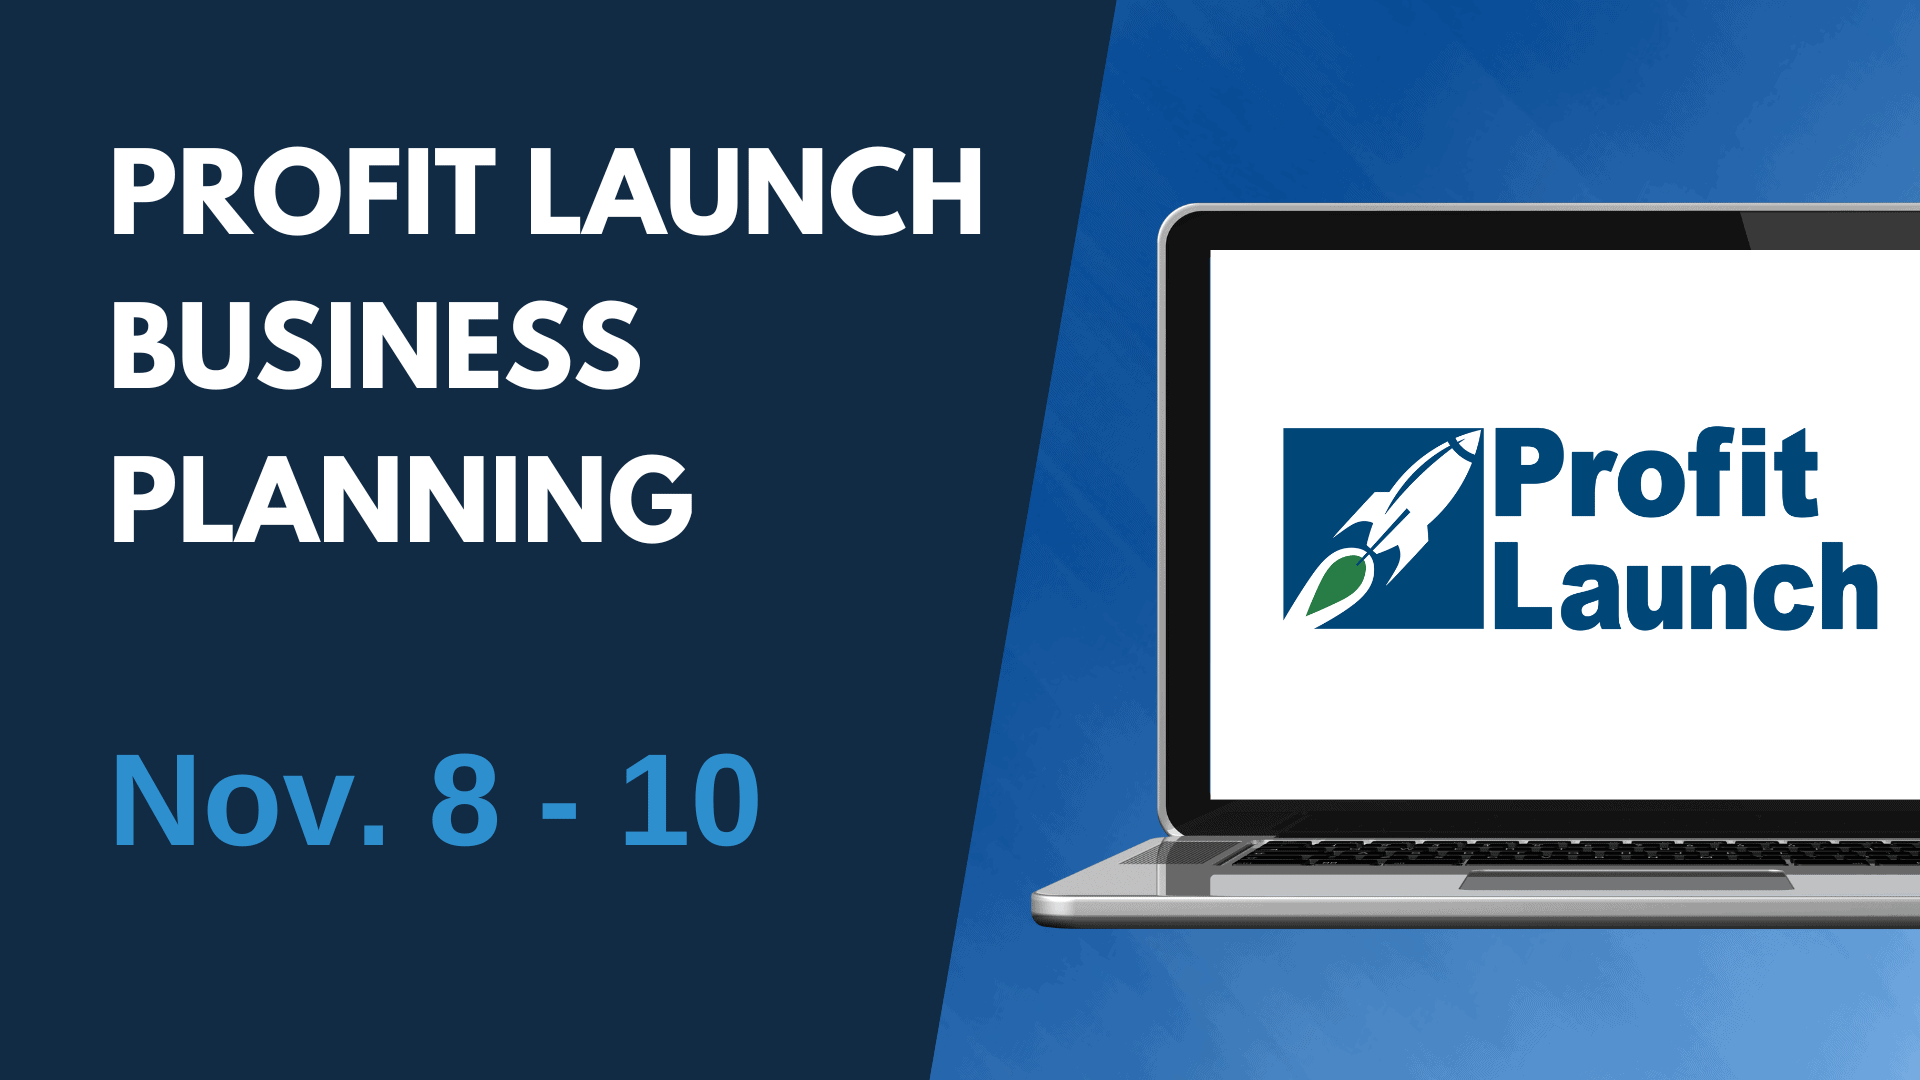 Profit Launch Business Planning - November 8 to 10